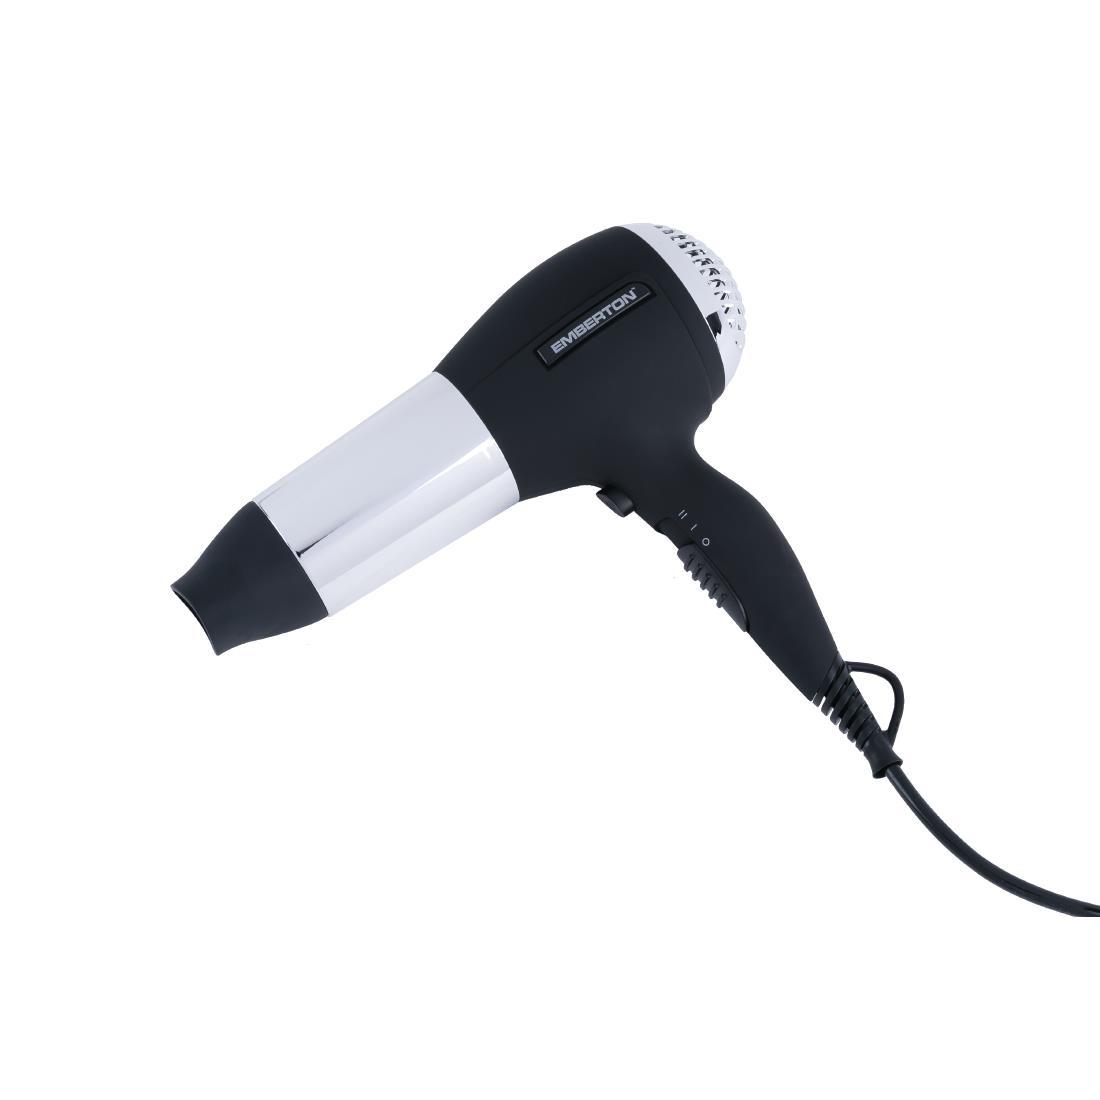 Deluxe Black and Chrome Hairdryer 1800W - CG077  - 1